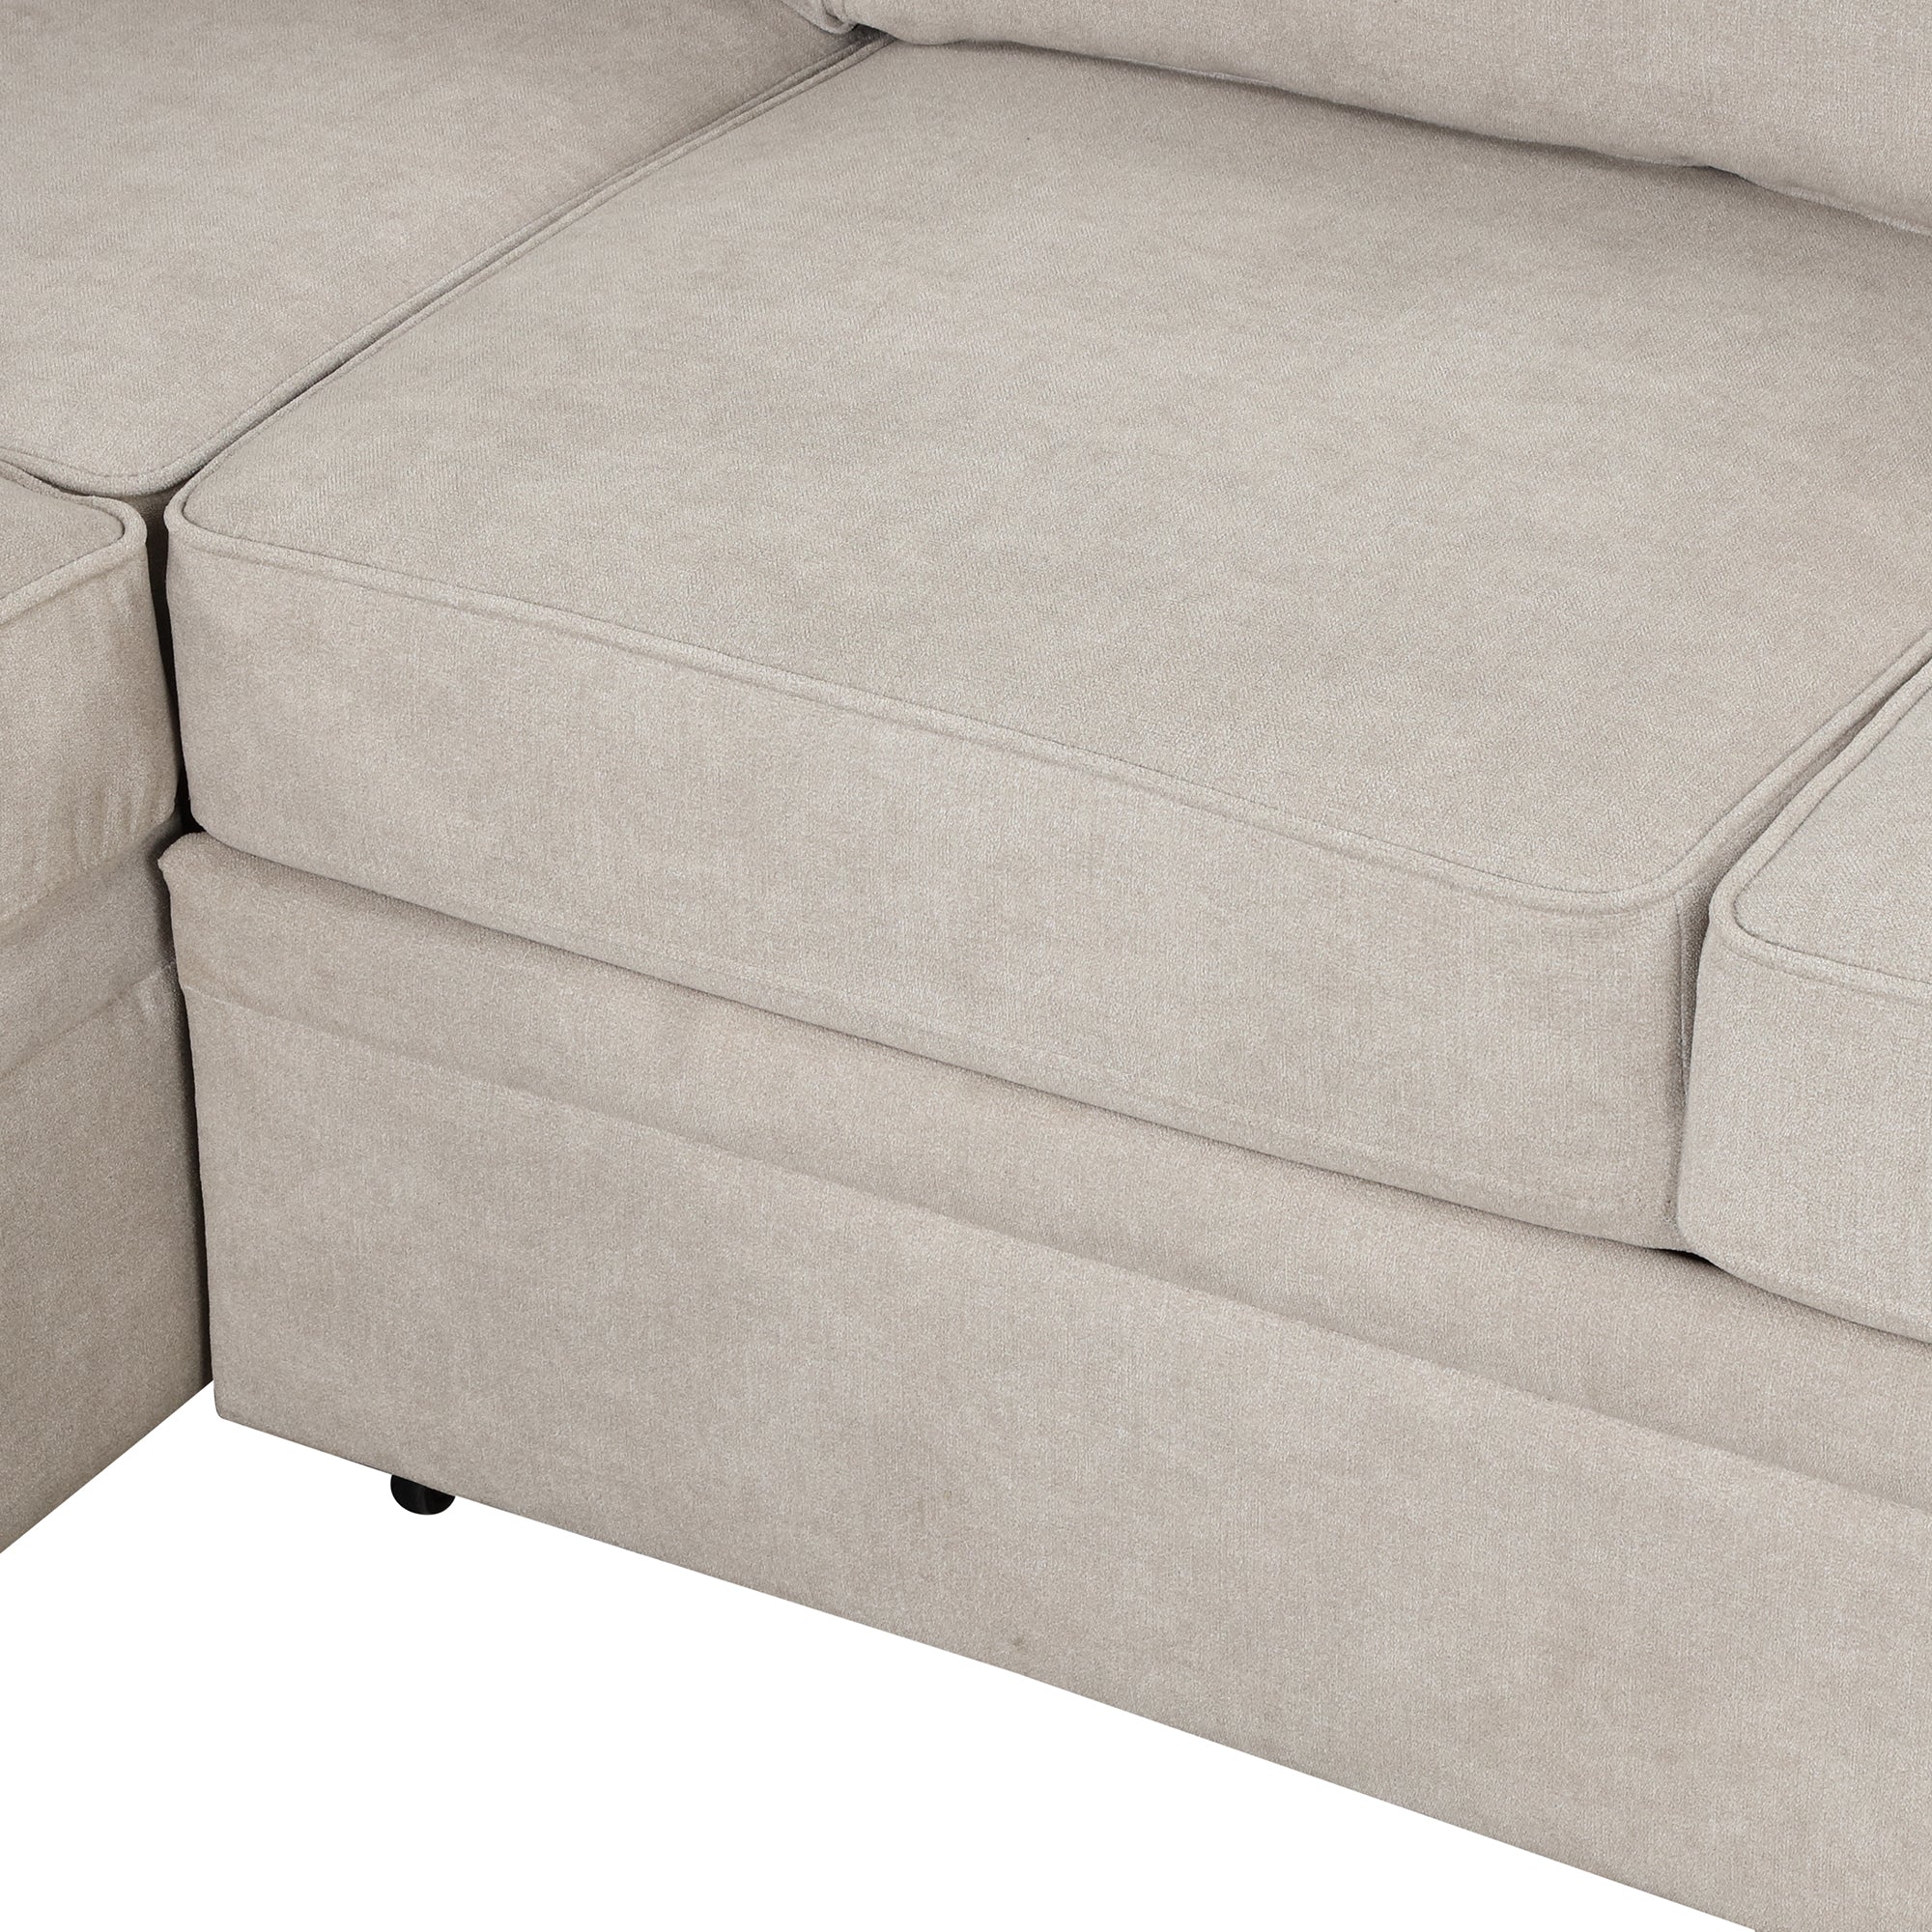 Beige Linen 87" Sectional Sleeper Sofa w/ Storage Ottoman-Sleeper Sectionals-American Furniture Outlet